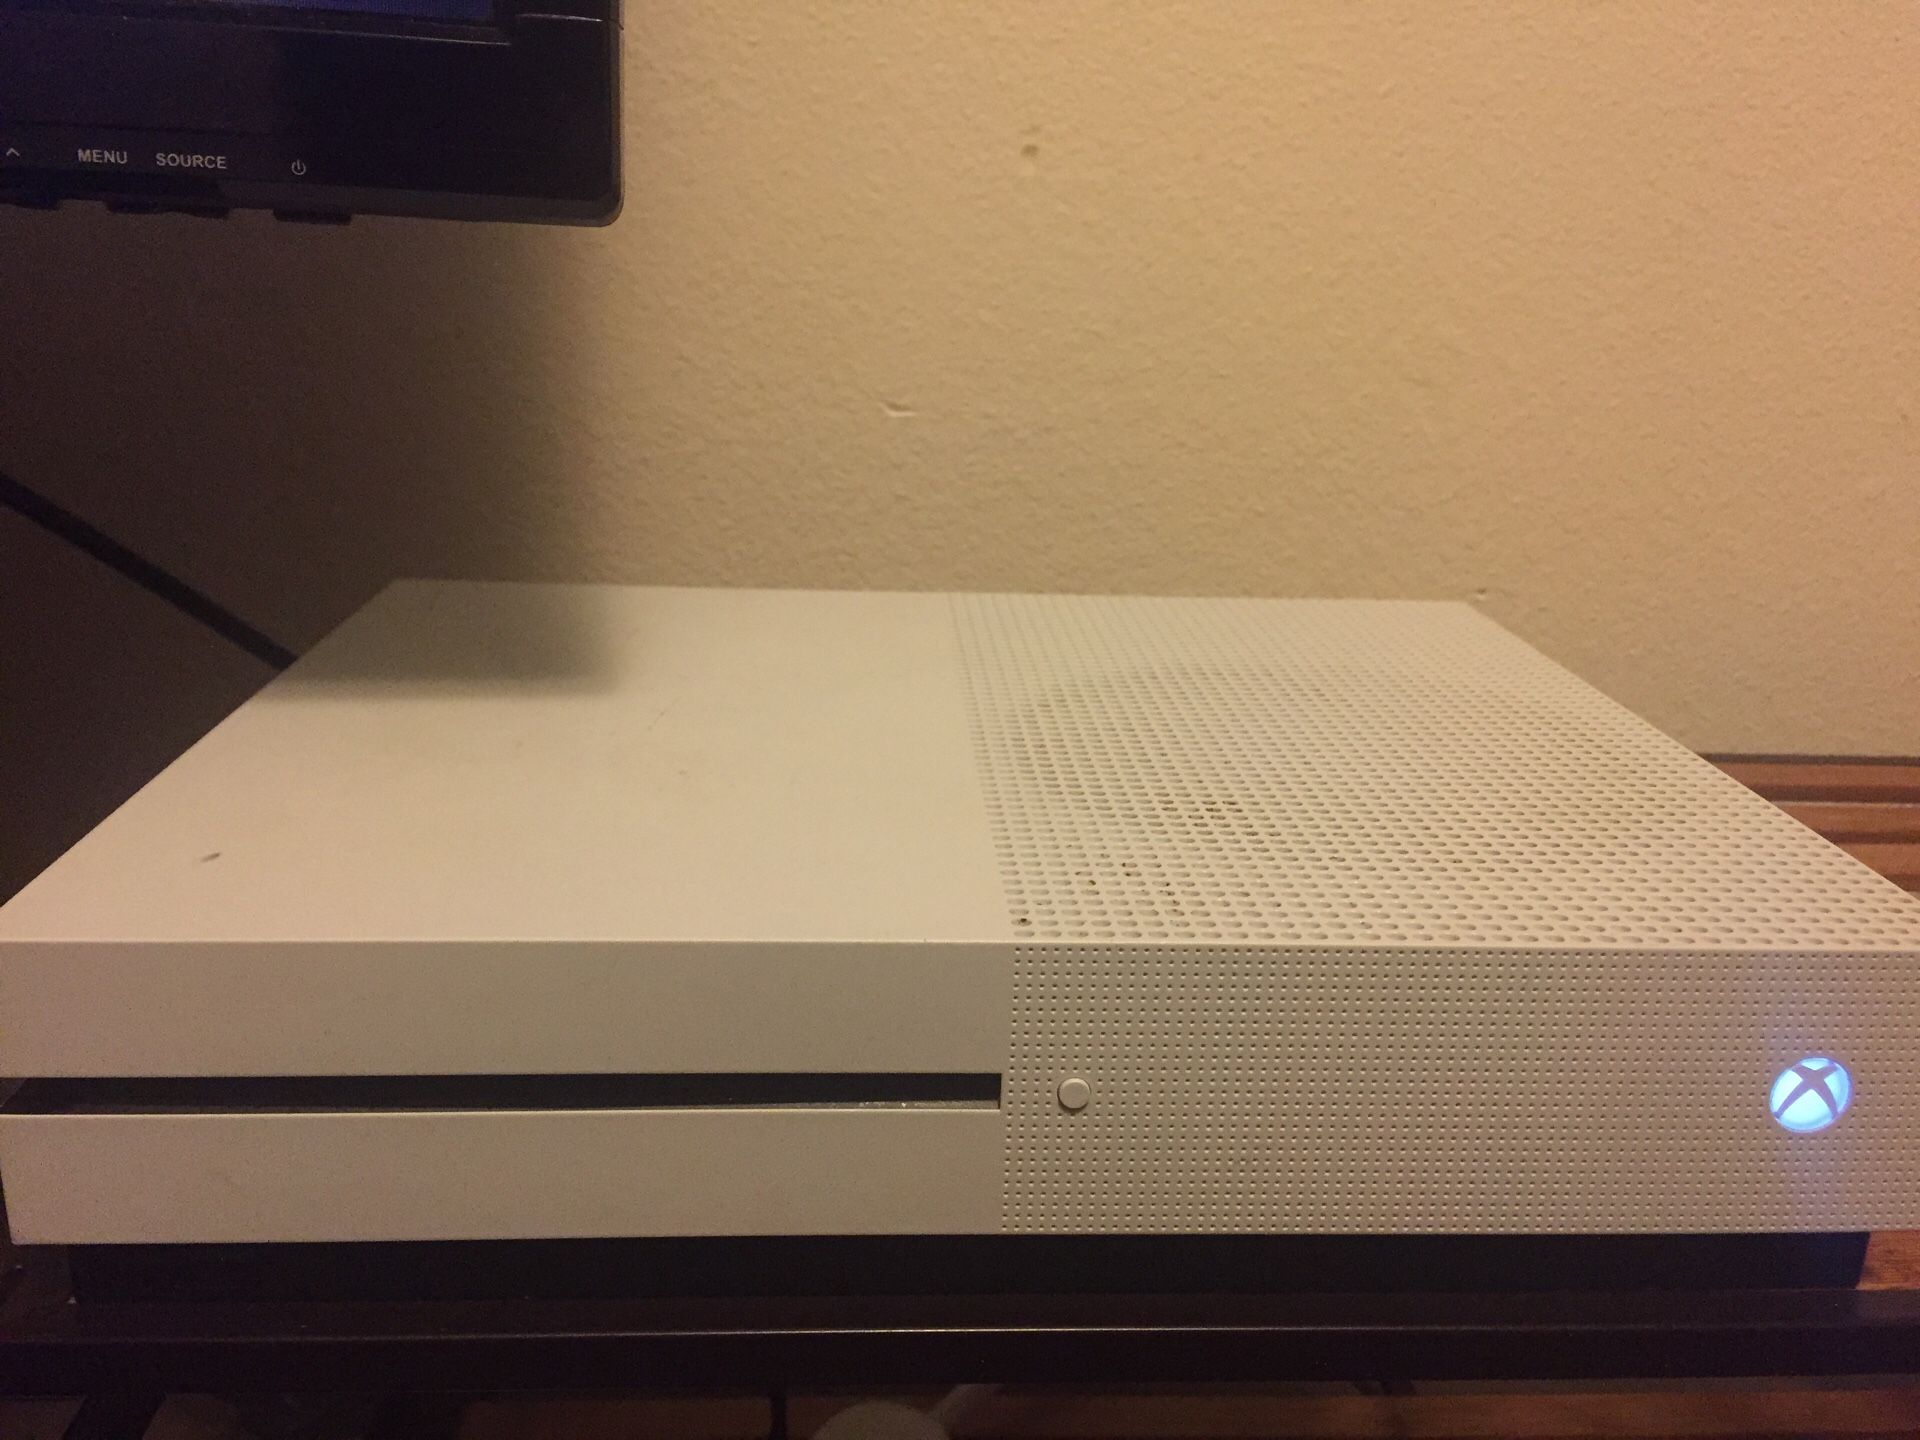 Xbox one s + 3 games and 3 controllers